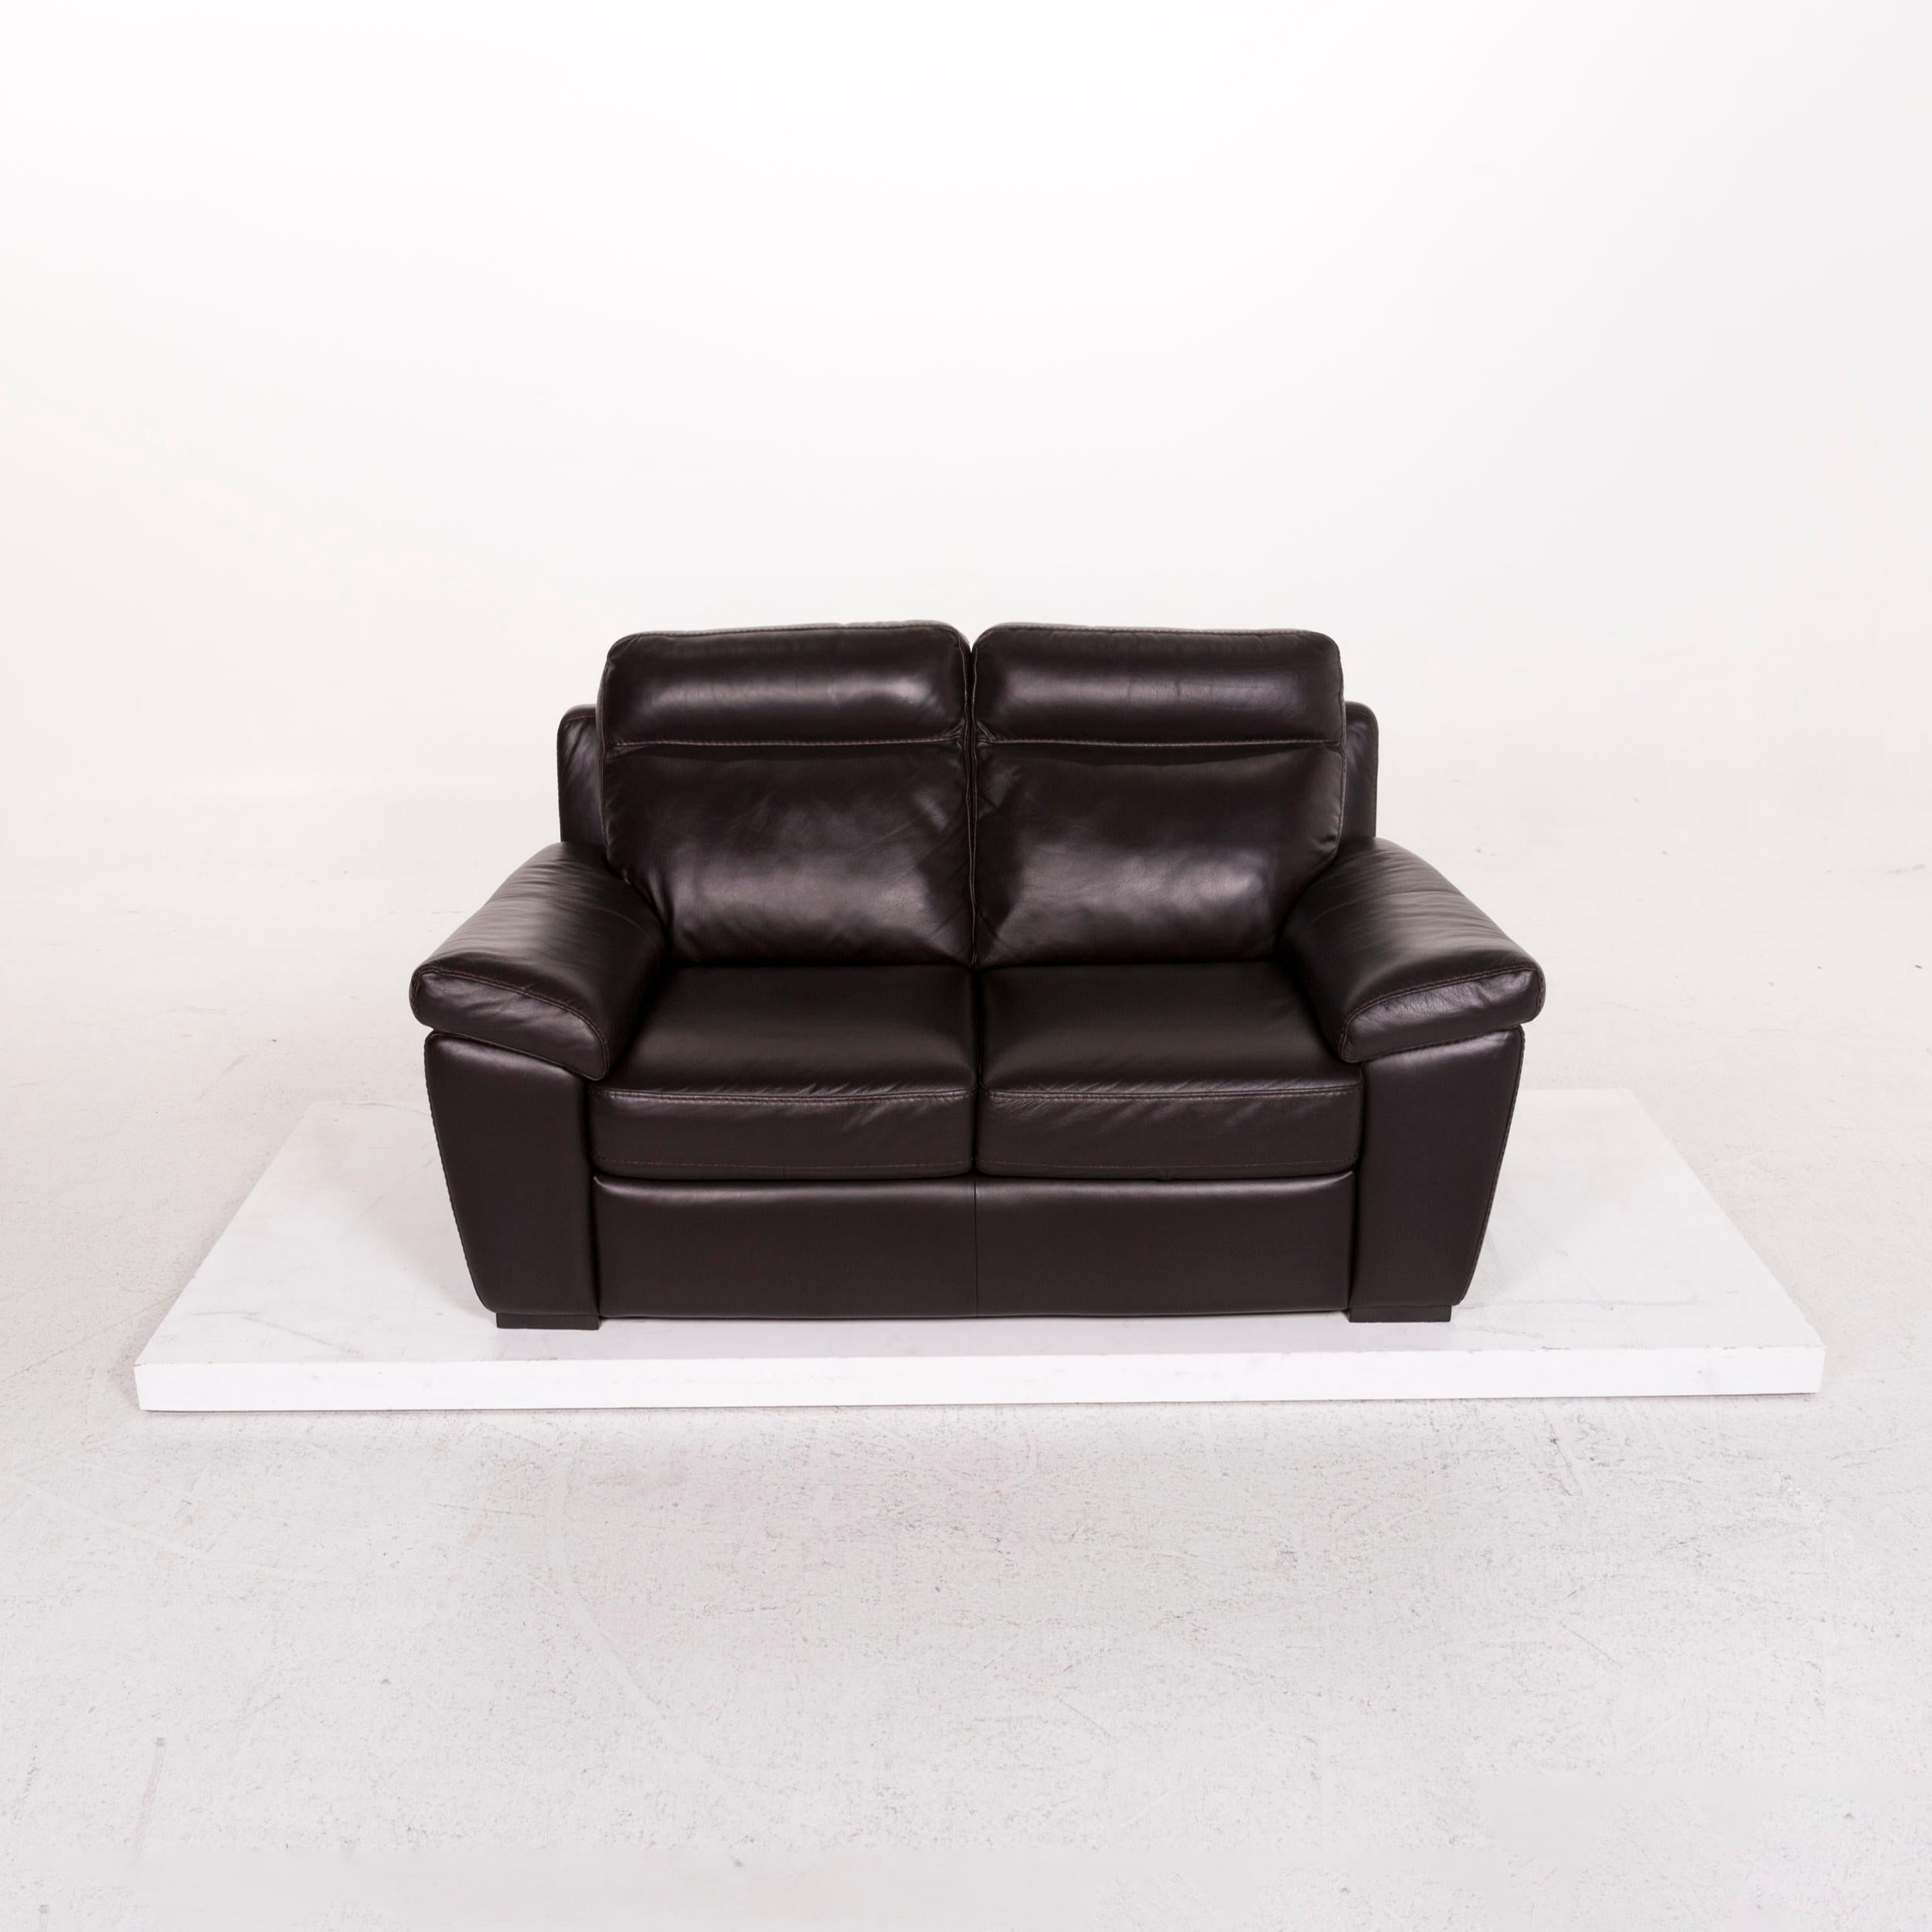 Modern Natuzzi Leather Sofa Brown Dark Brown Two-Seat Couch